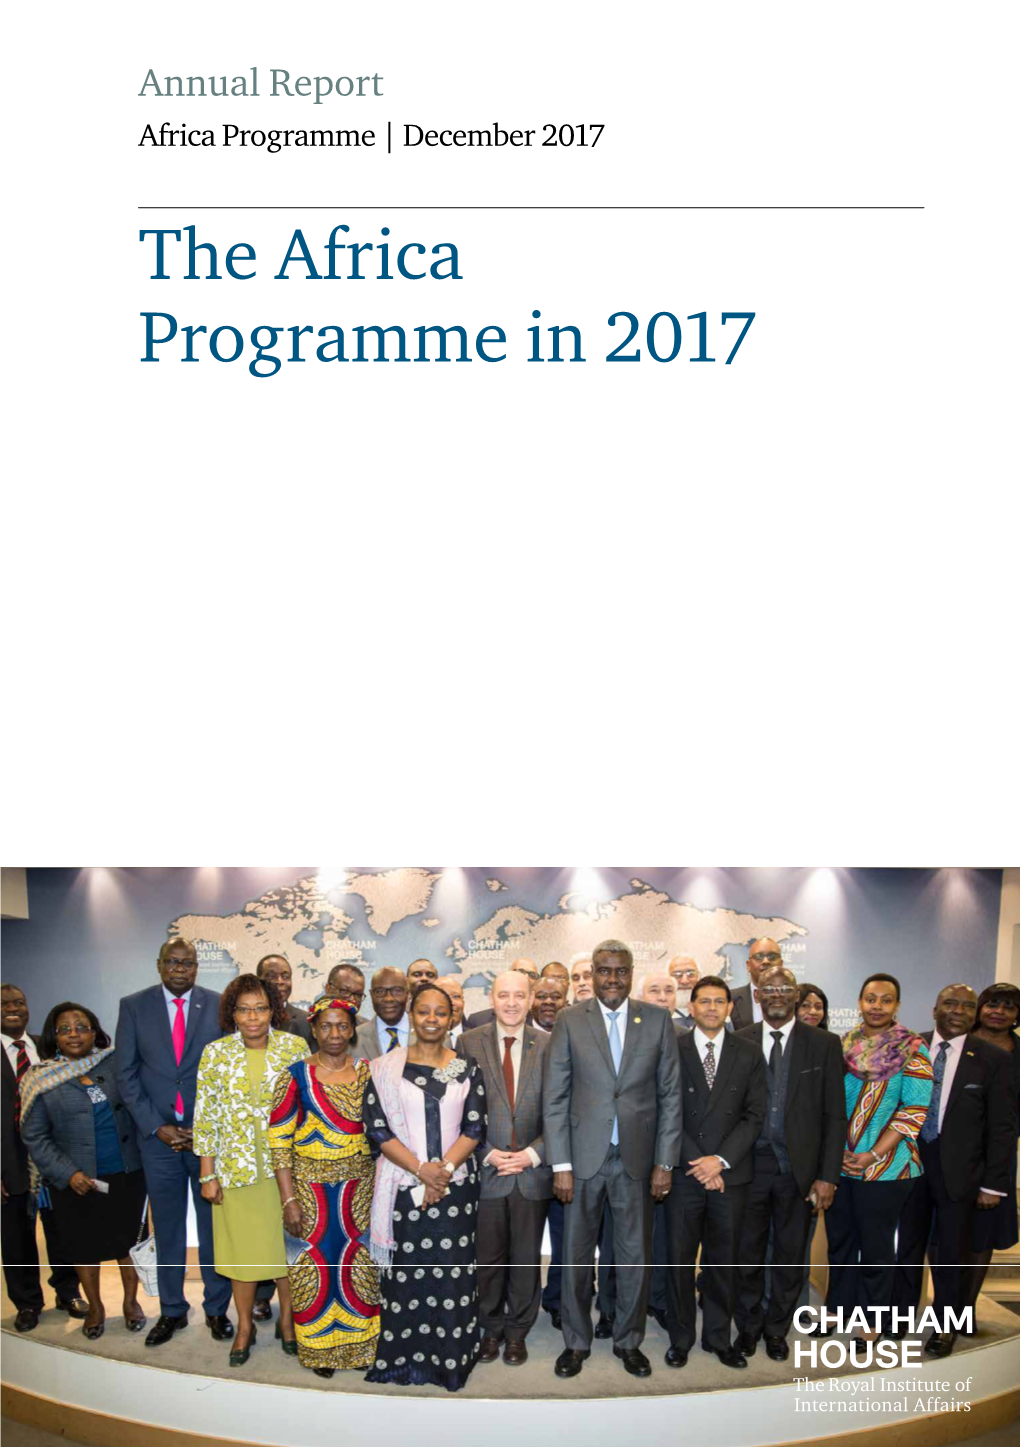 The Africa Programme in 2017 Chatham House Chatham House, the Royal Institute of International Affairs, Is an Independent Policy Institute Based in London